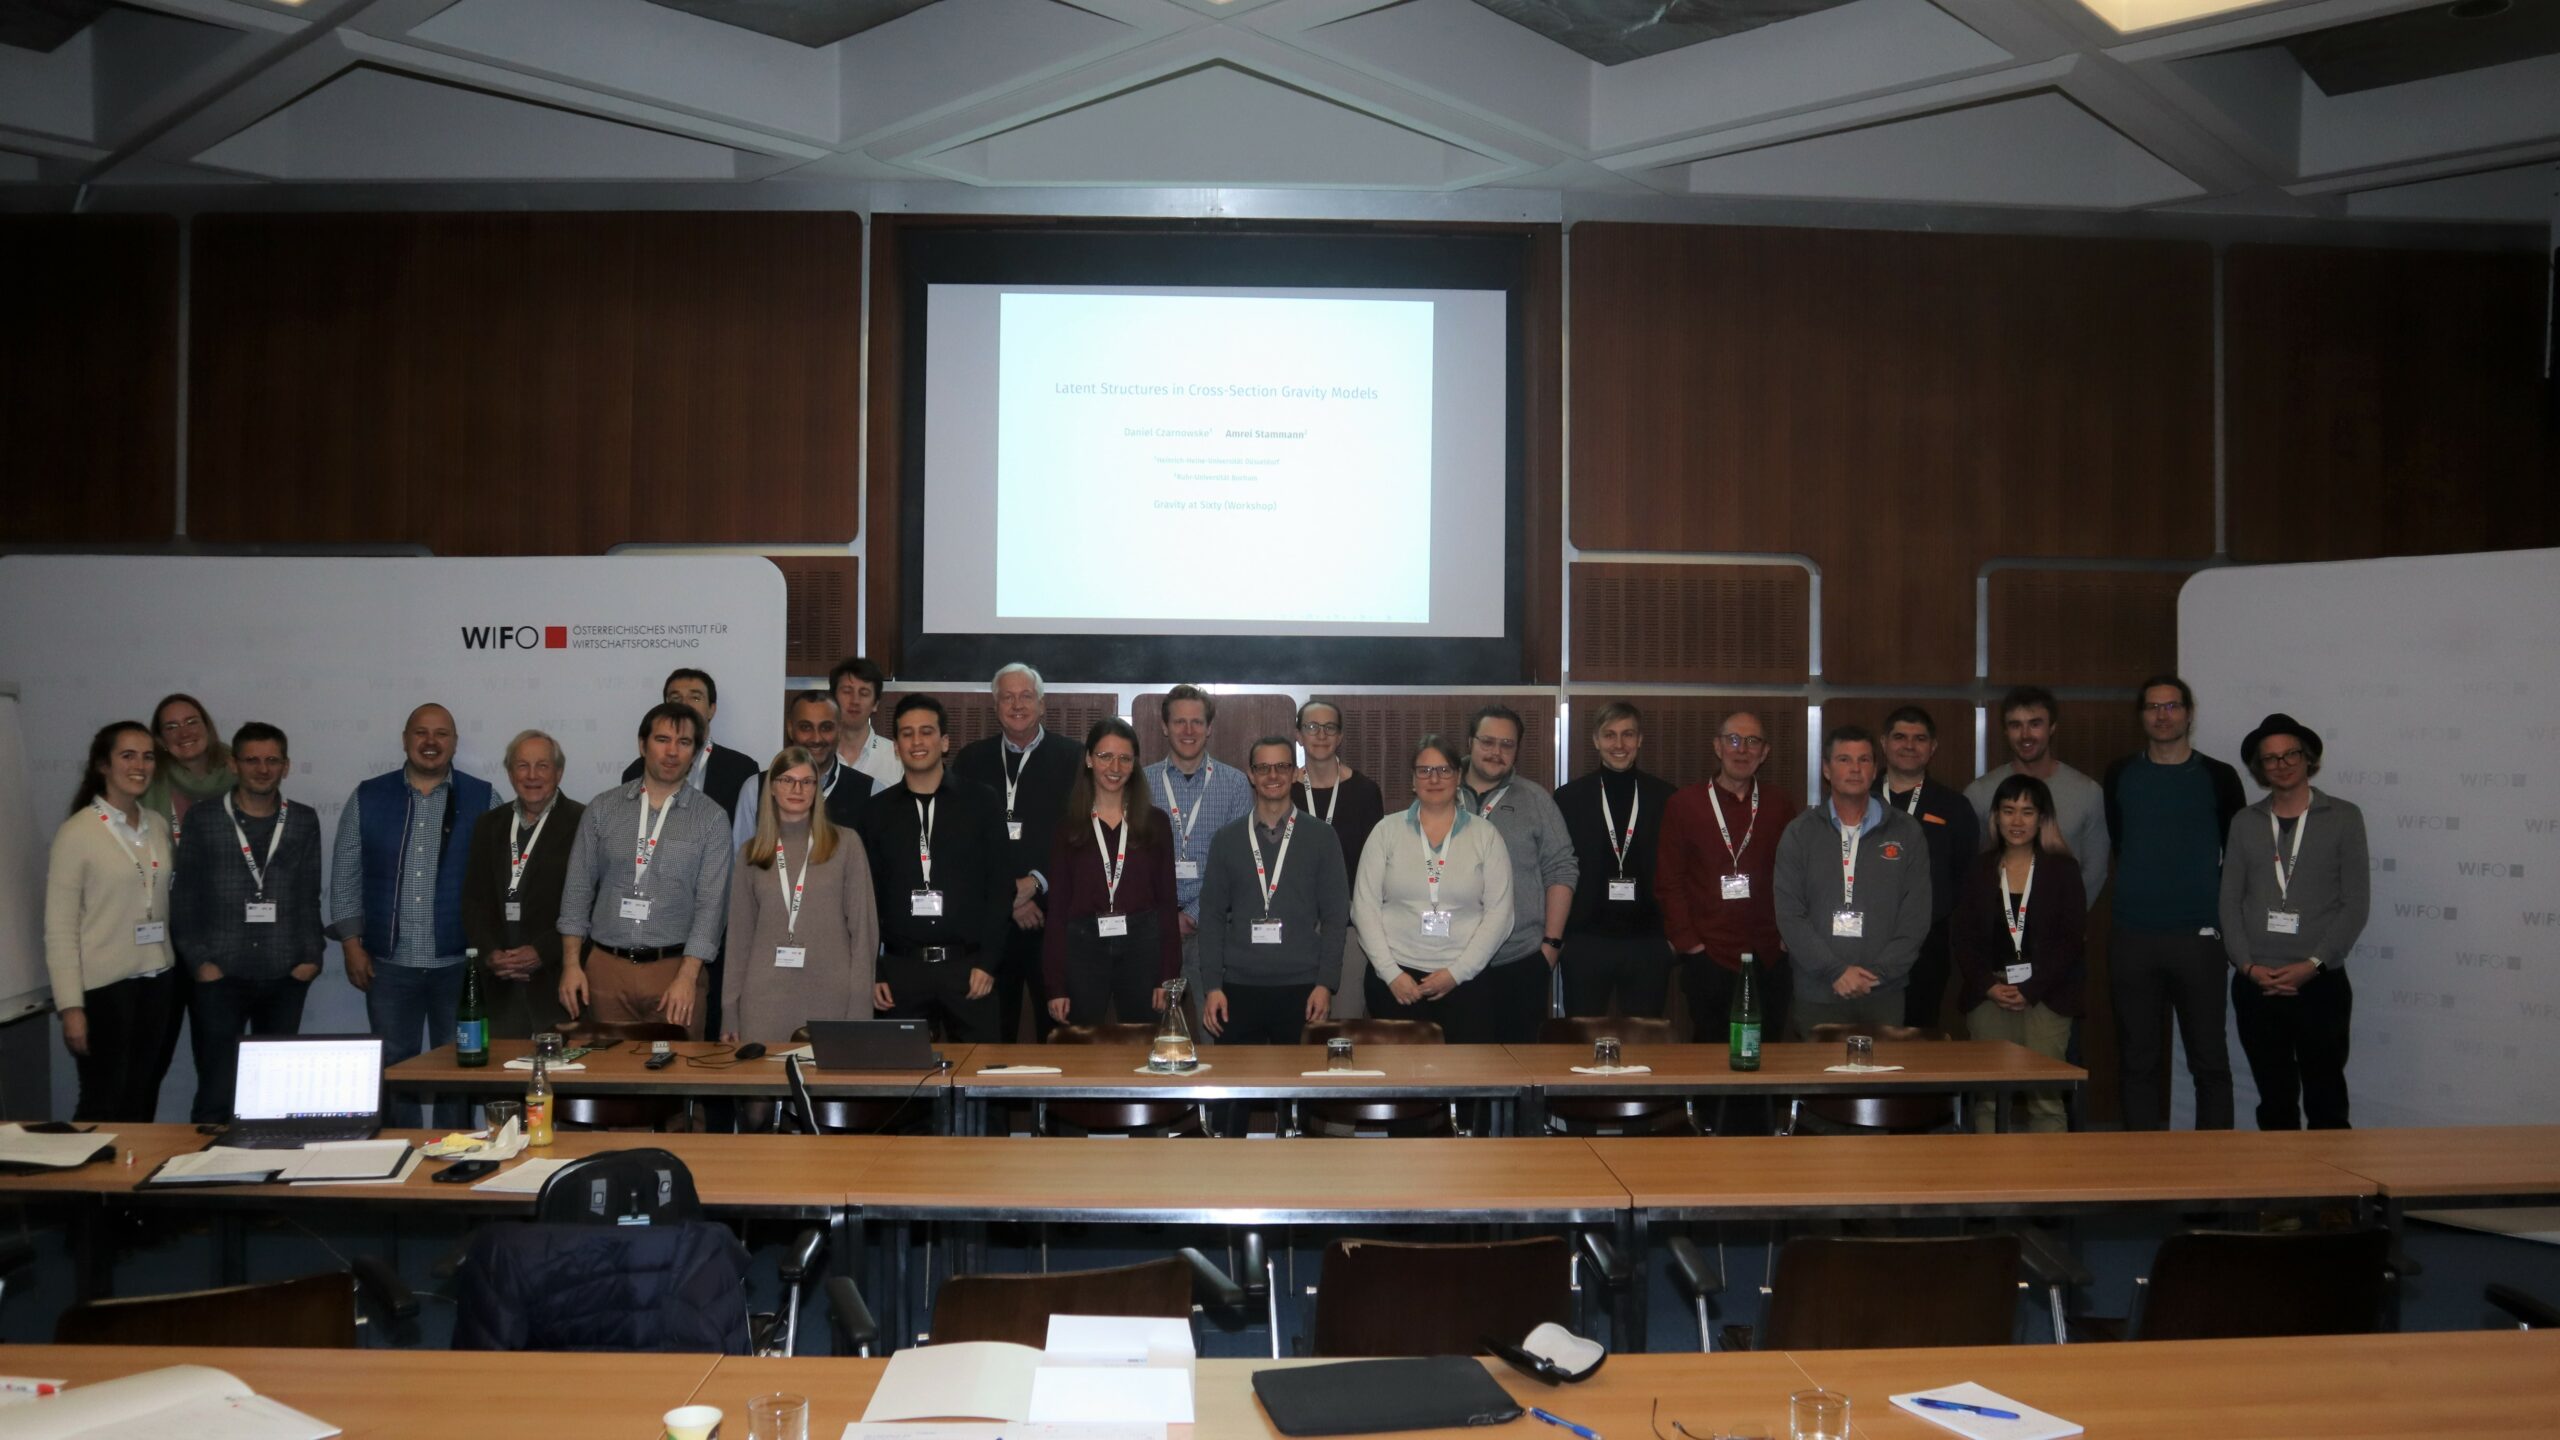 This group picture shows the participants of the FIW-Workshop Gravity at Sixty.